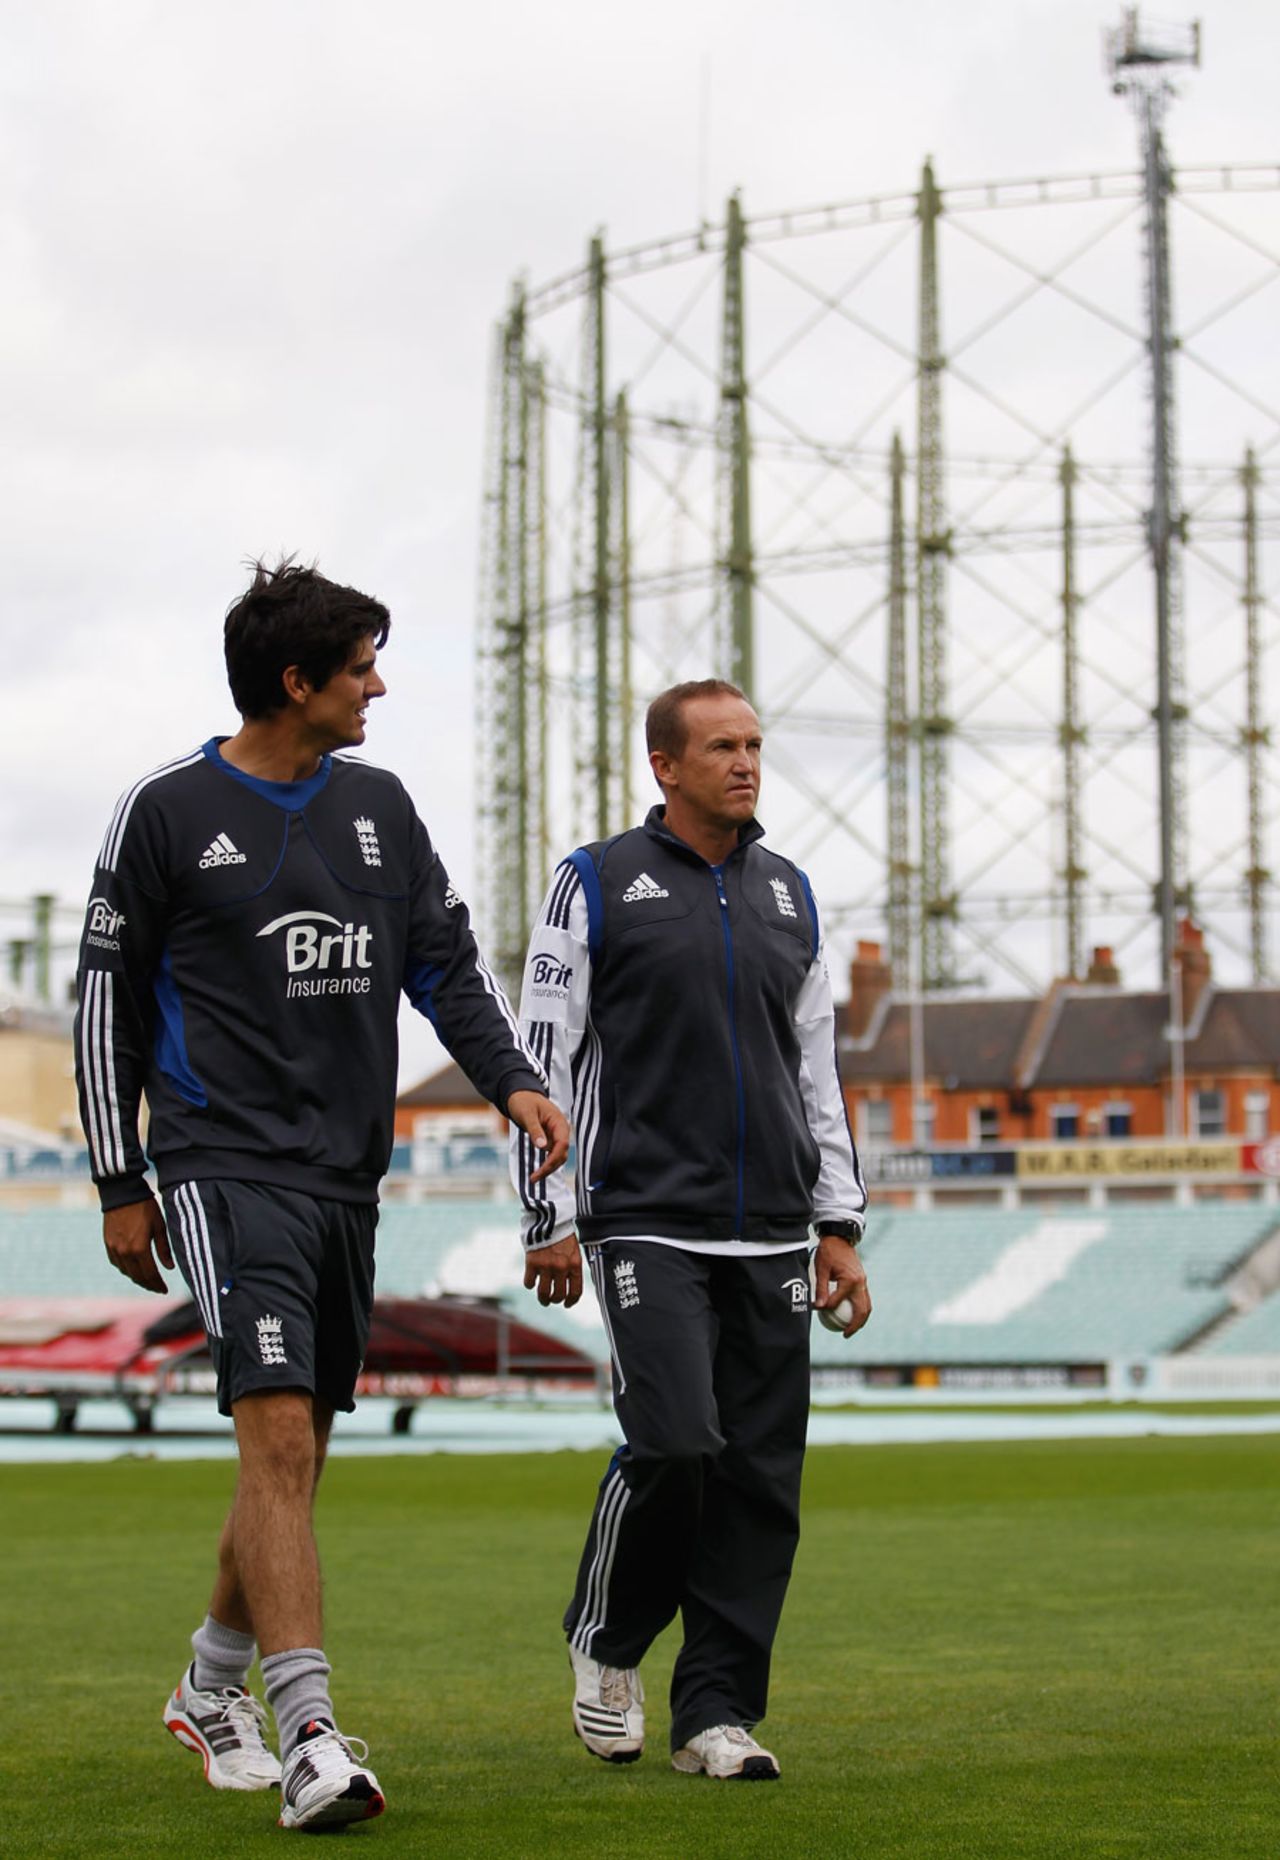 Alastair Cook and Andy Flower take a stroll across the outfield, The Oval, August 30, 2012